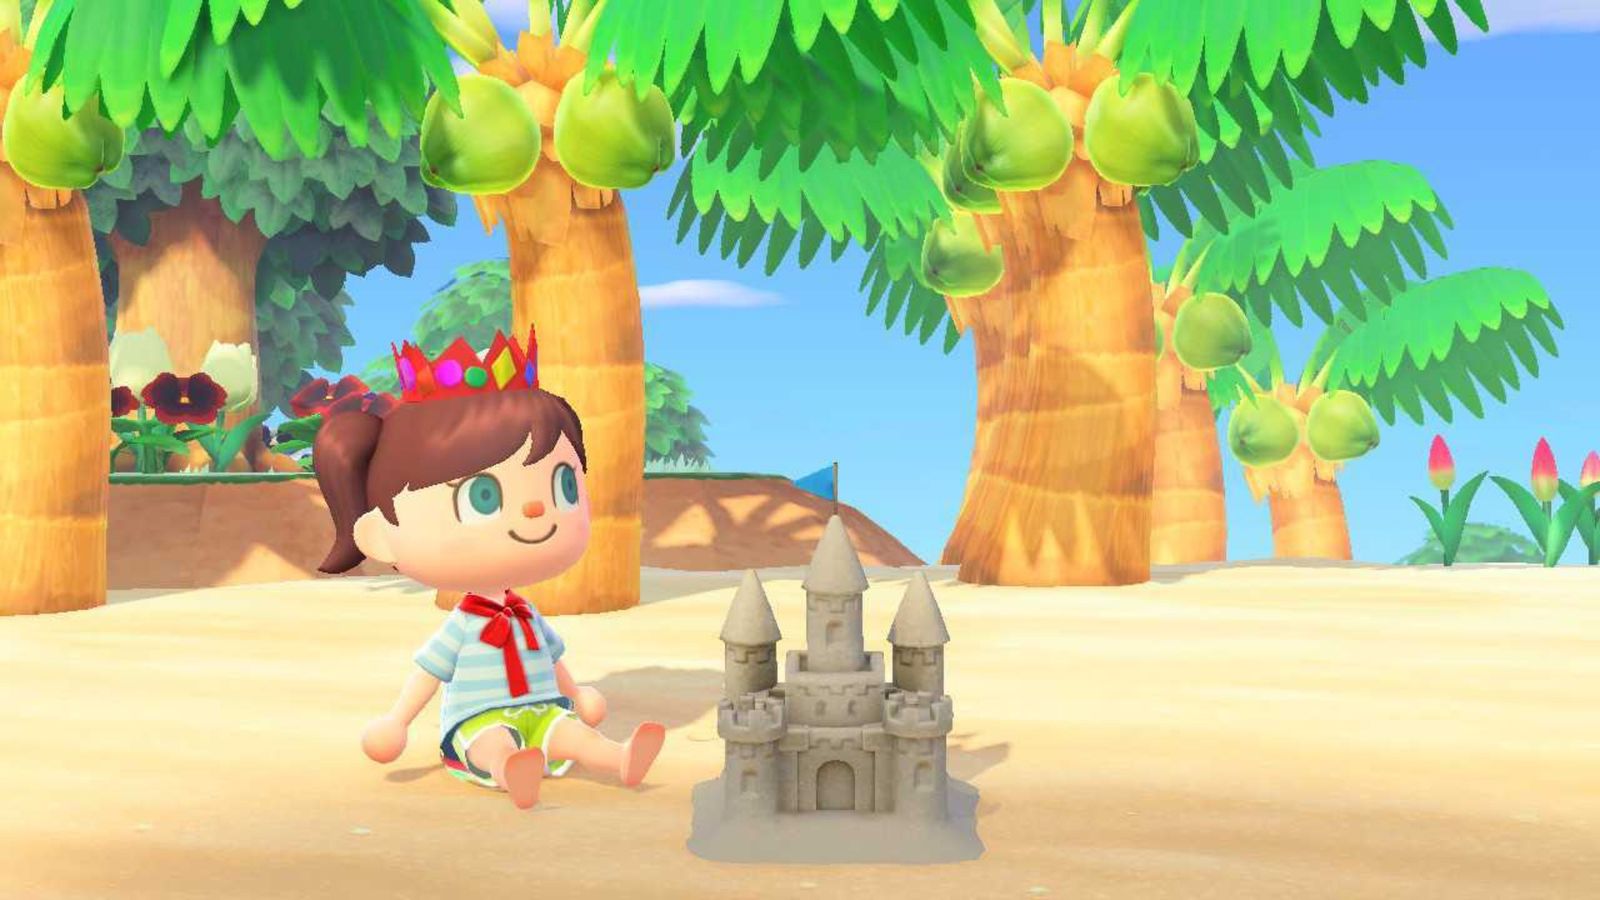 Animal Crossing New Horizons. The player is sat by a sandcastle on the beach while wearing a crown and a cape. There are coconut trees in the background. The player is on the left.